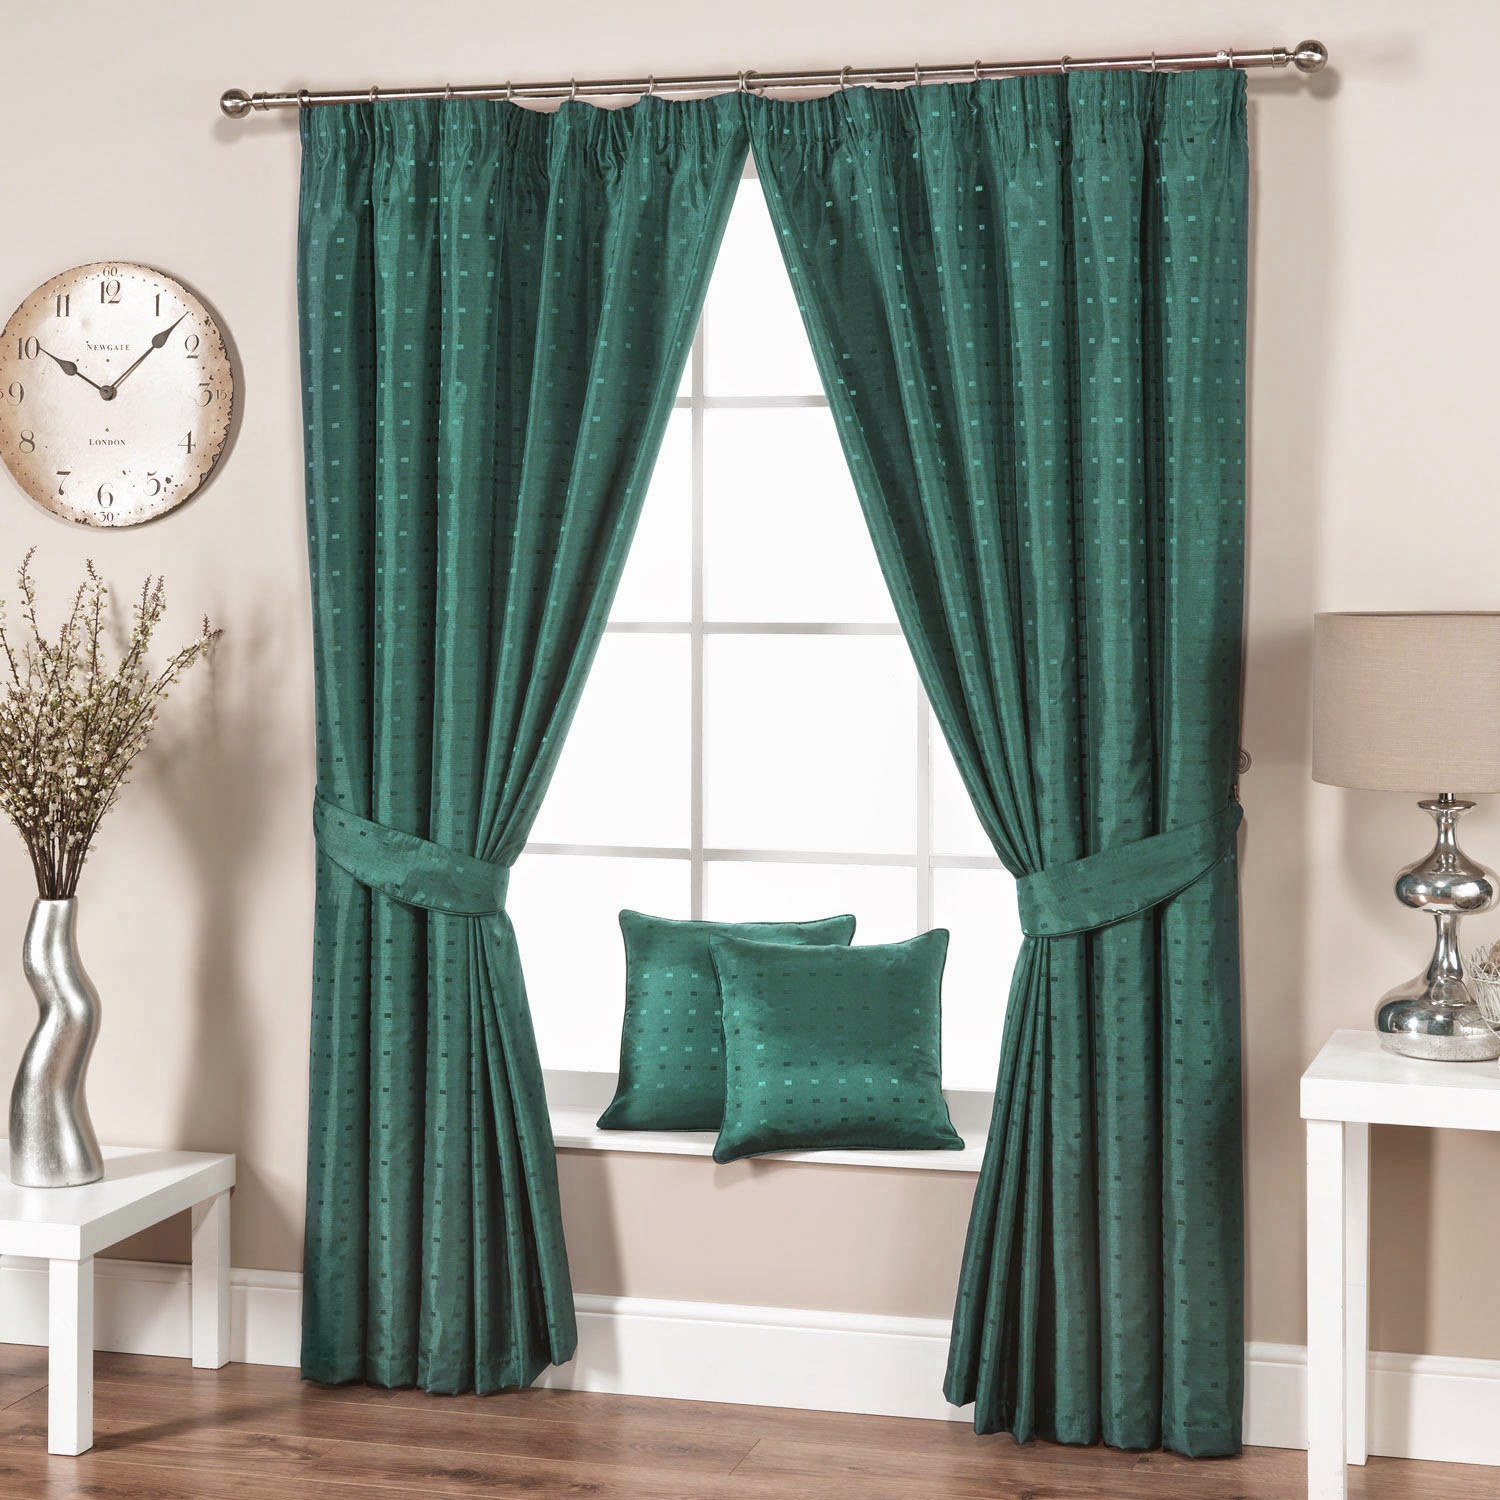 Green Living Room Curtains
 Green living room curtains for modern interior